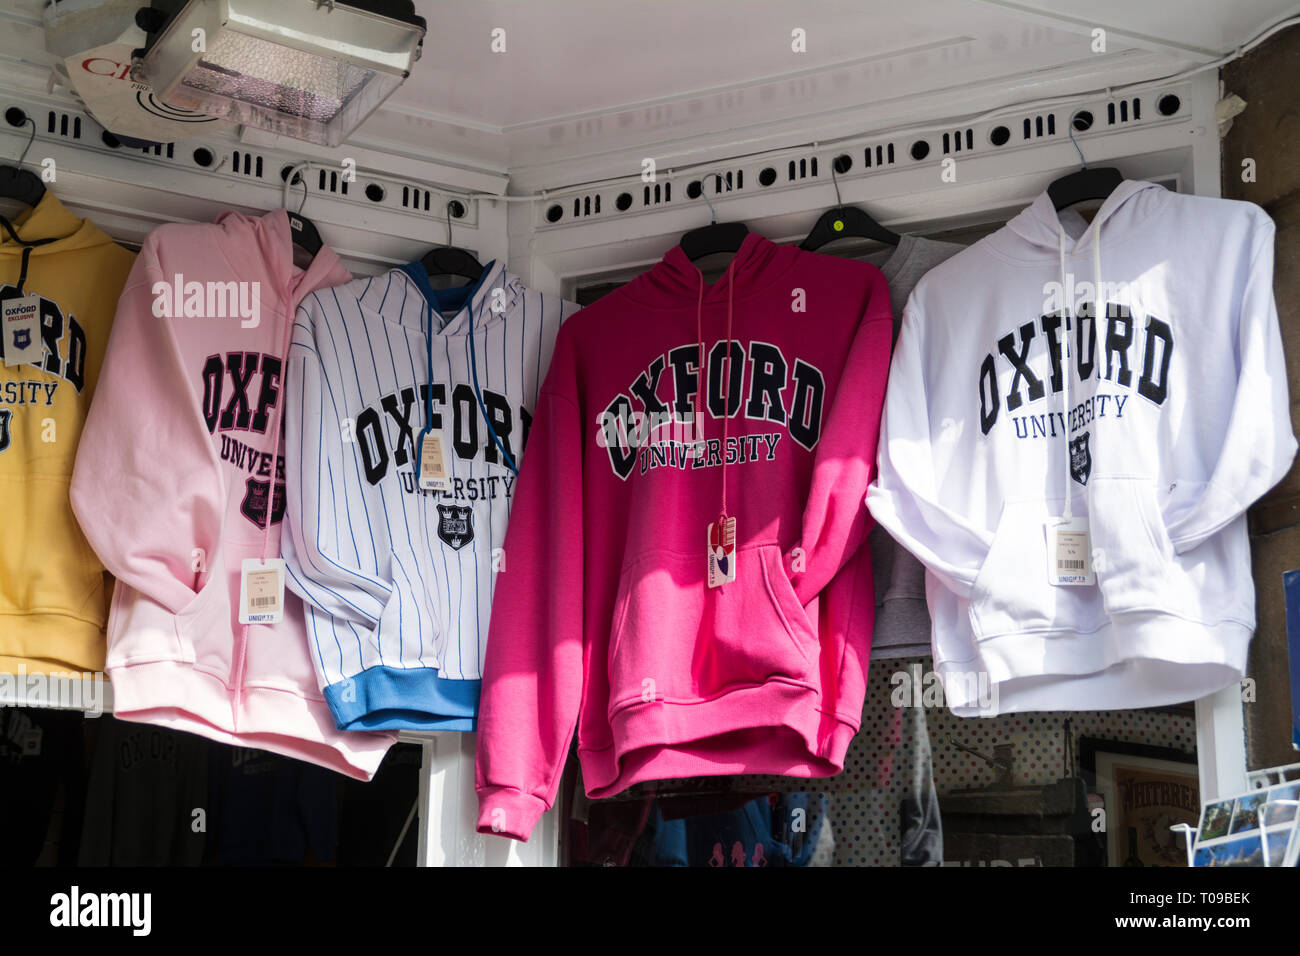 Seaters of Oxford University on sale in one of the many clothes stores in Oxford, Oxfordshire, Britain Stock Photo